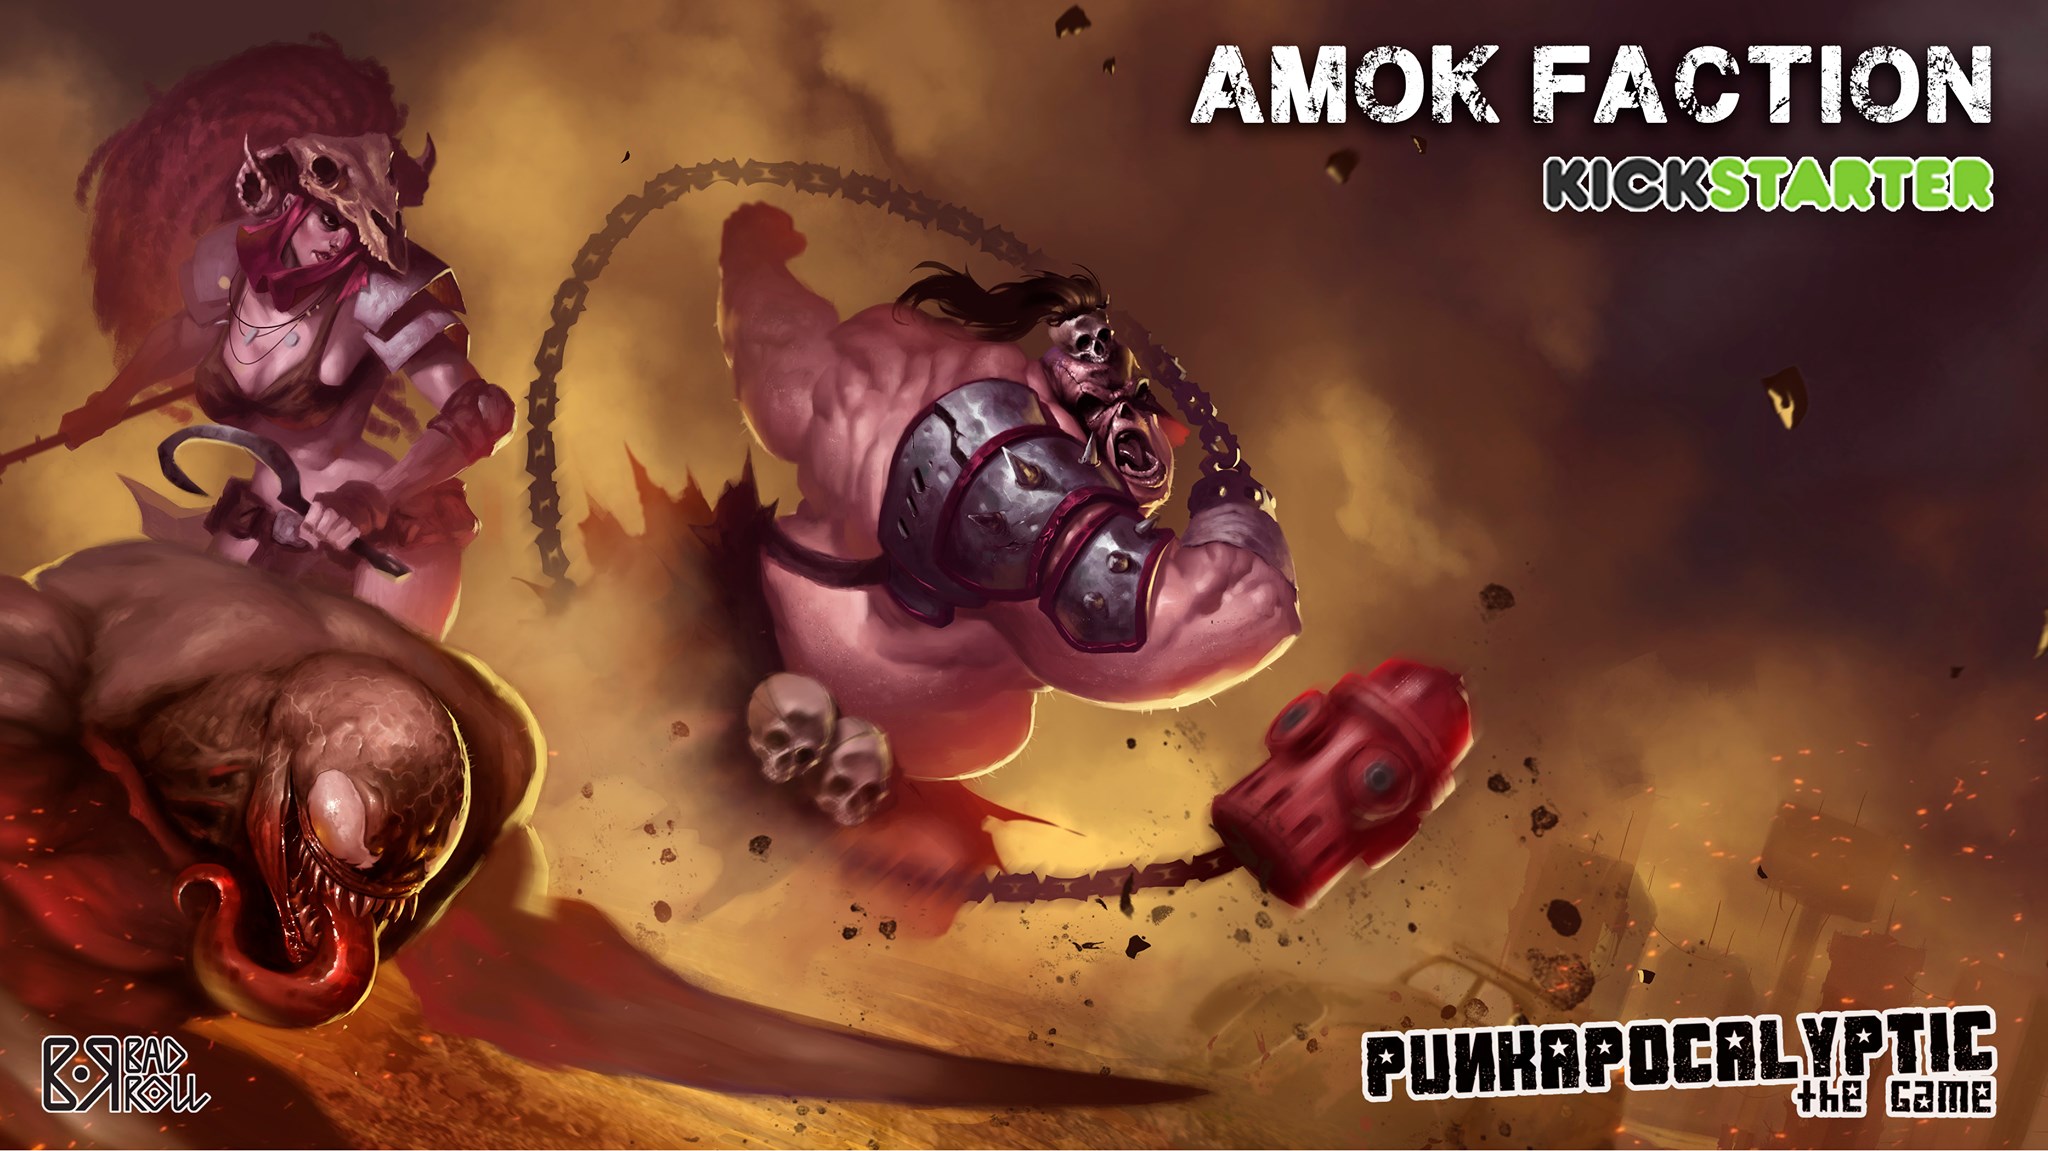 Last days for the PM of the Punkapocalyptic Amok campaign.